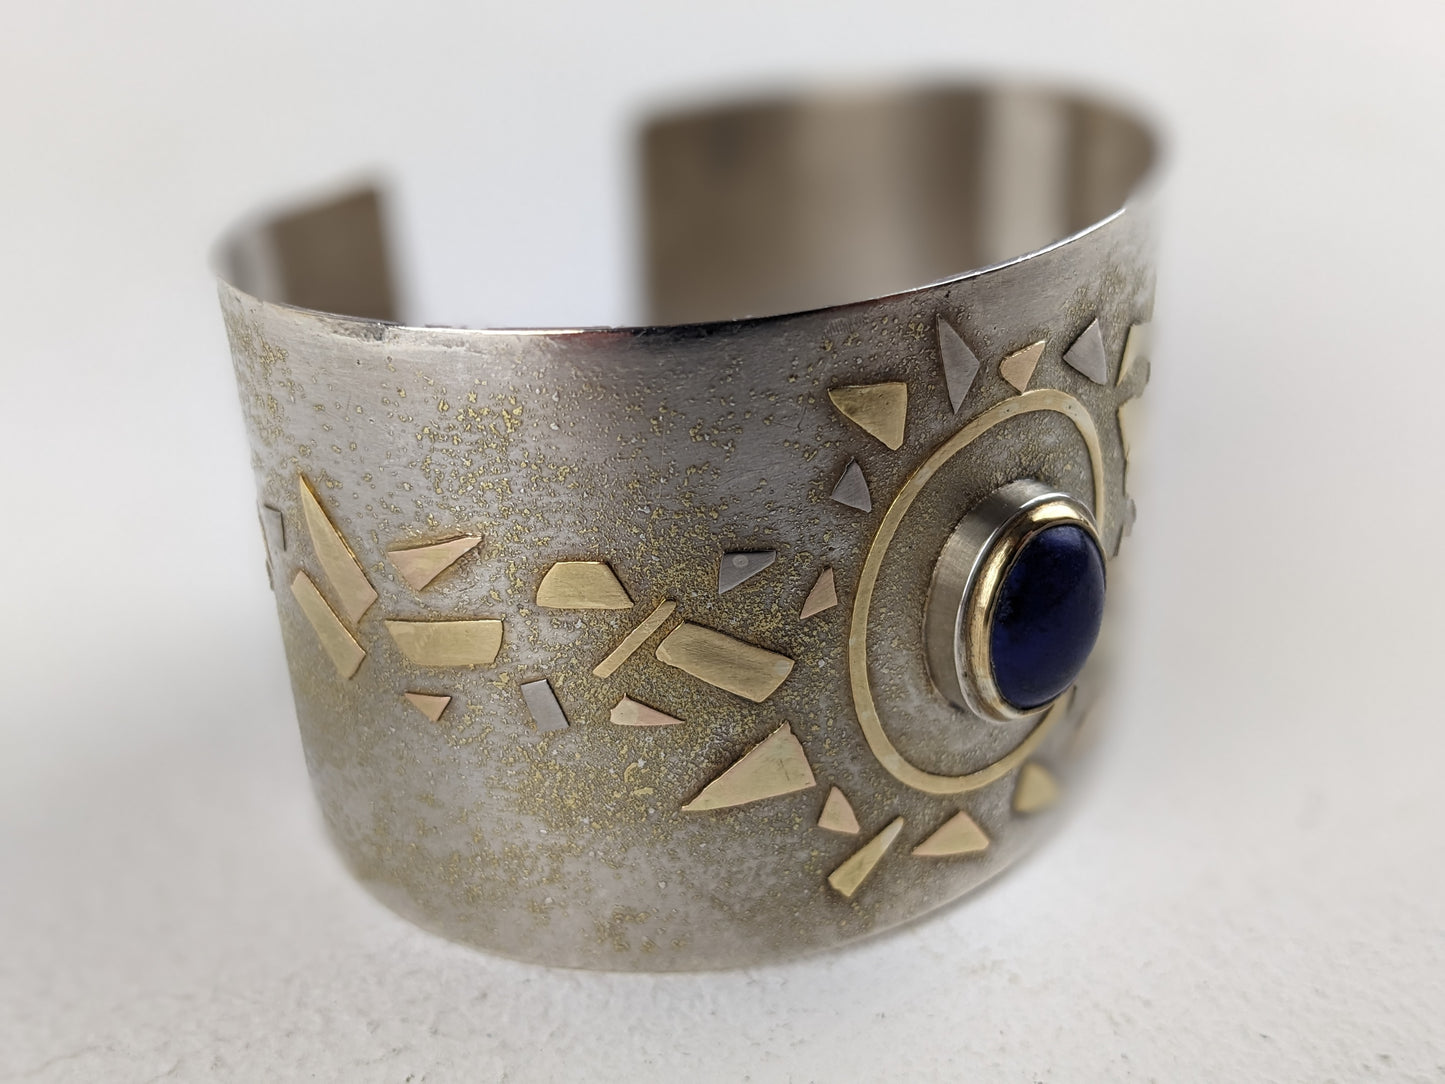 Mannheim, Catherine - Silver Cuff with Gold Shards and Lapis